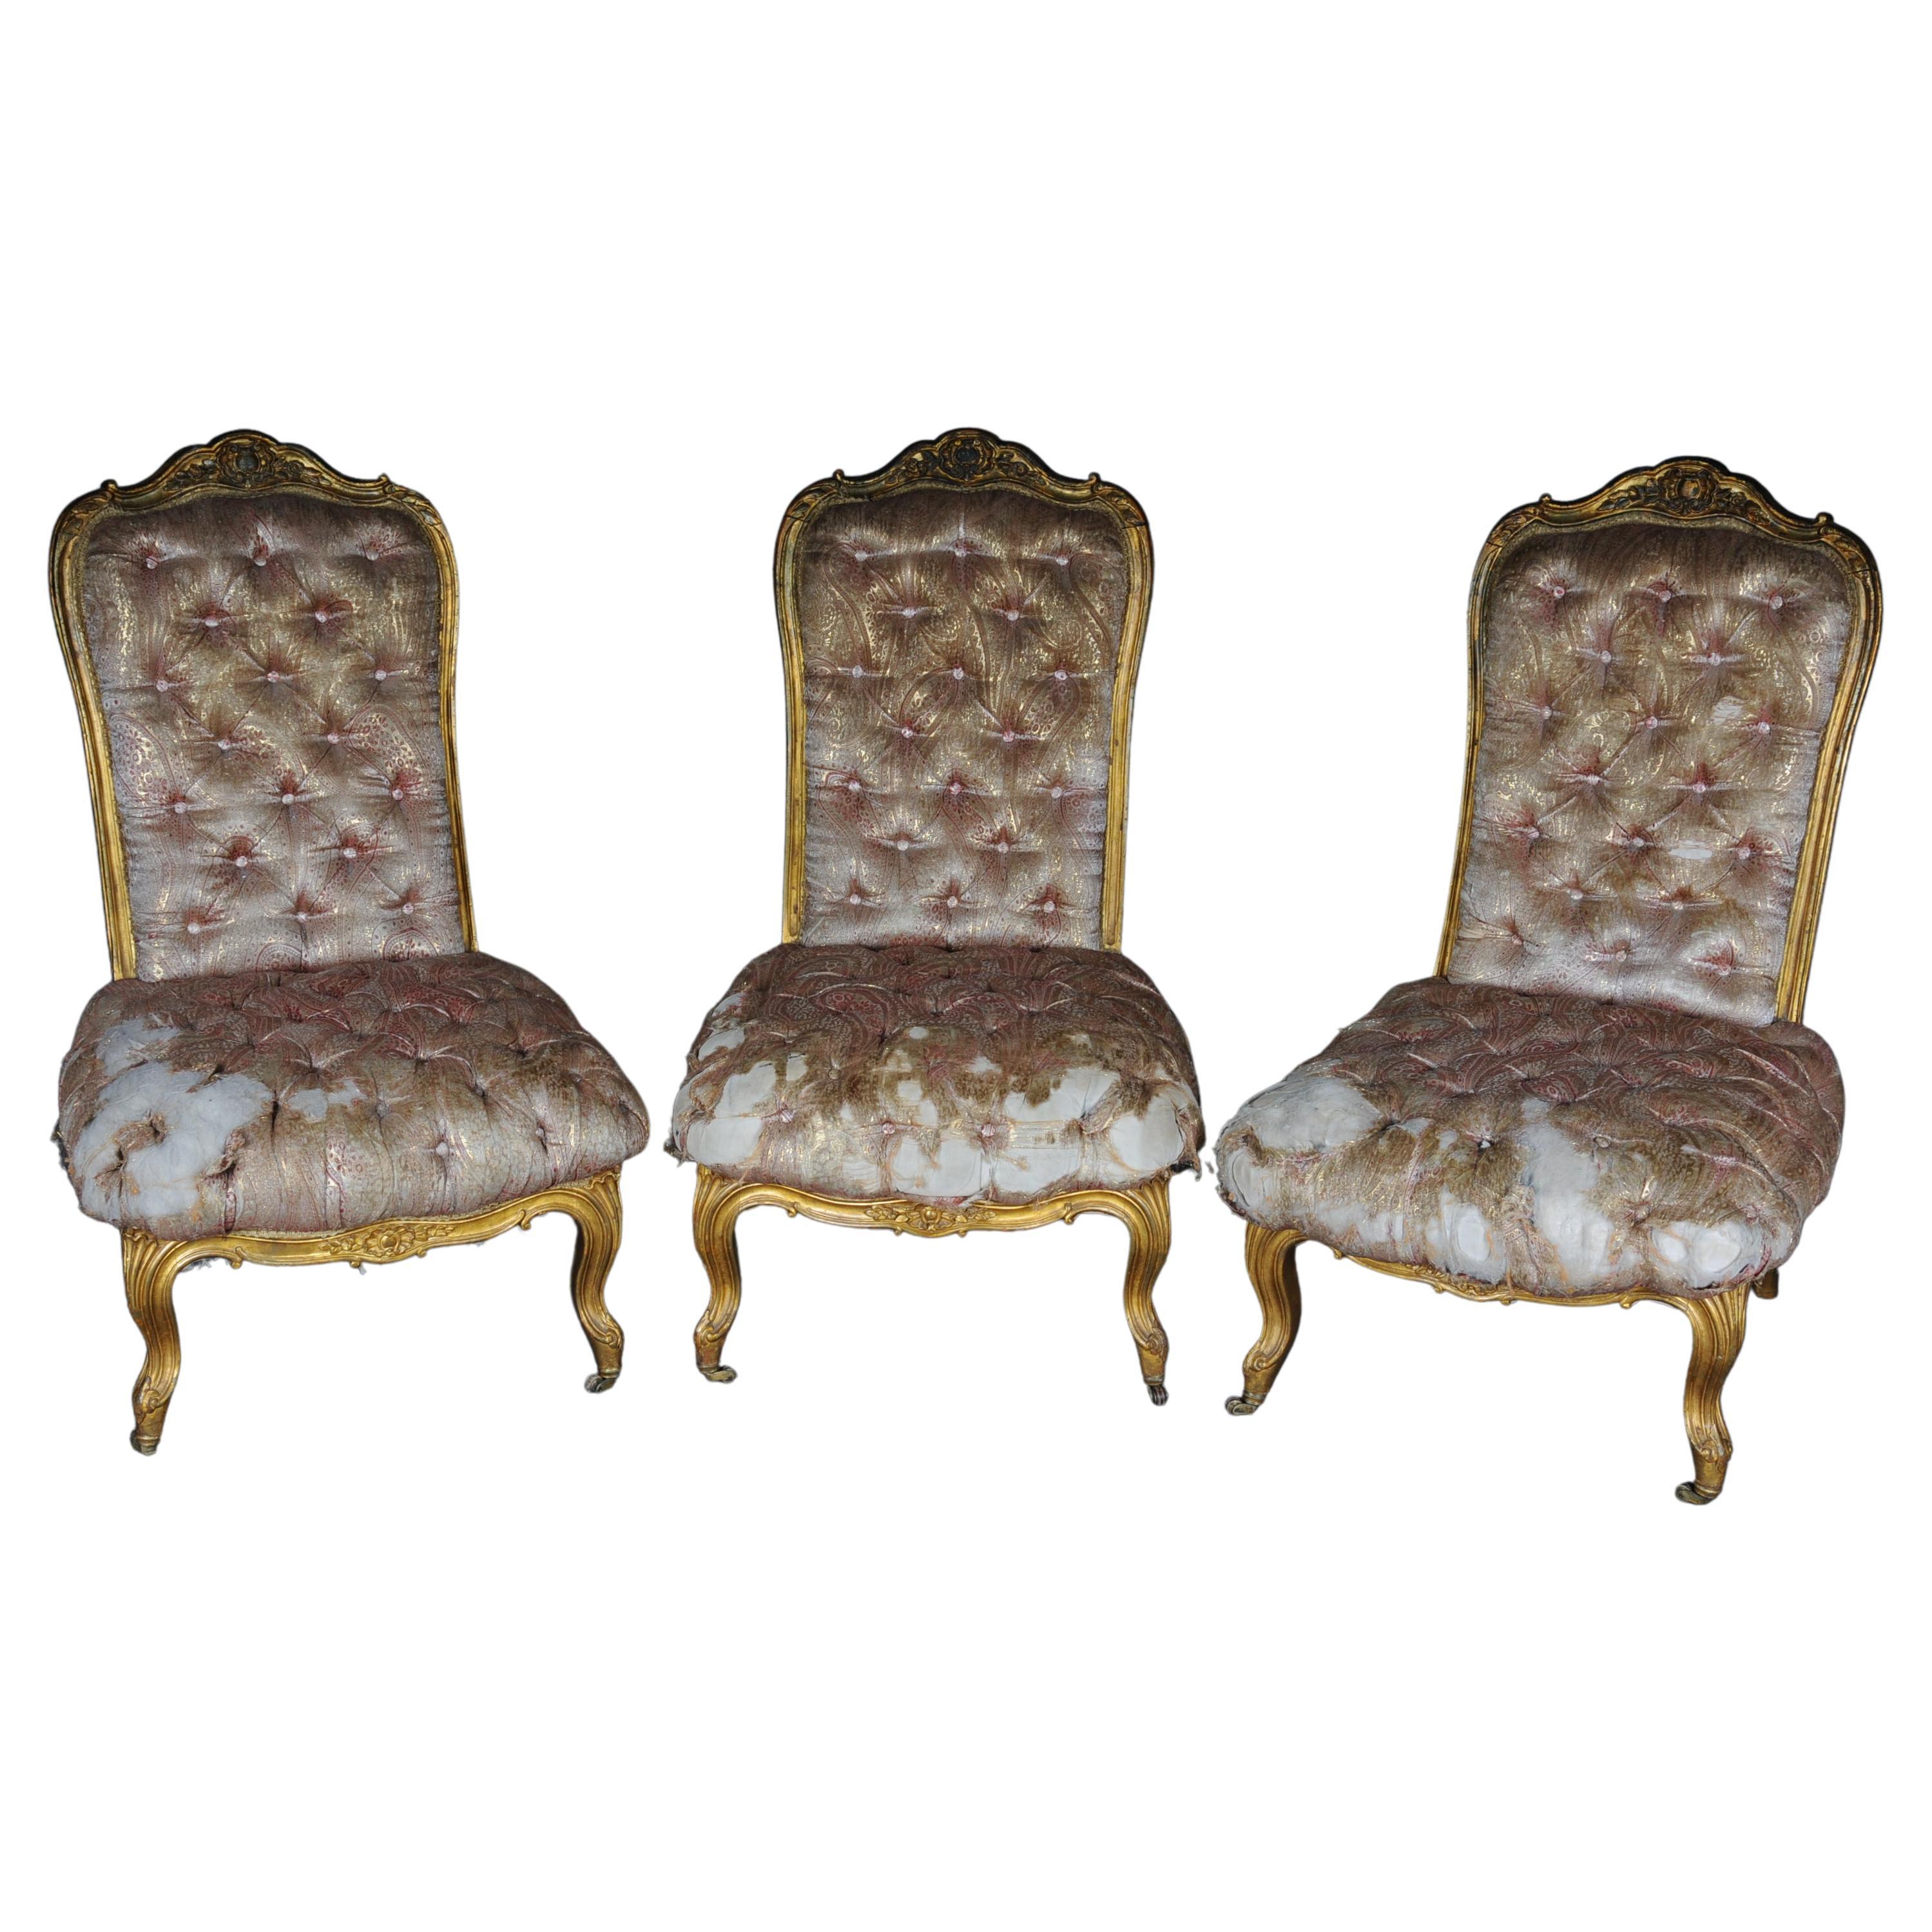 3 French Salon Lounge Chairs from the Bellevue Palace in Berlin, Gold from 1890